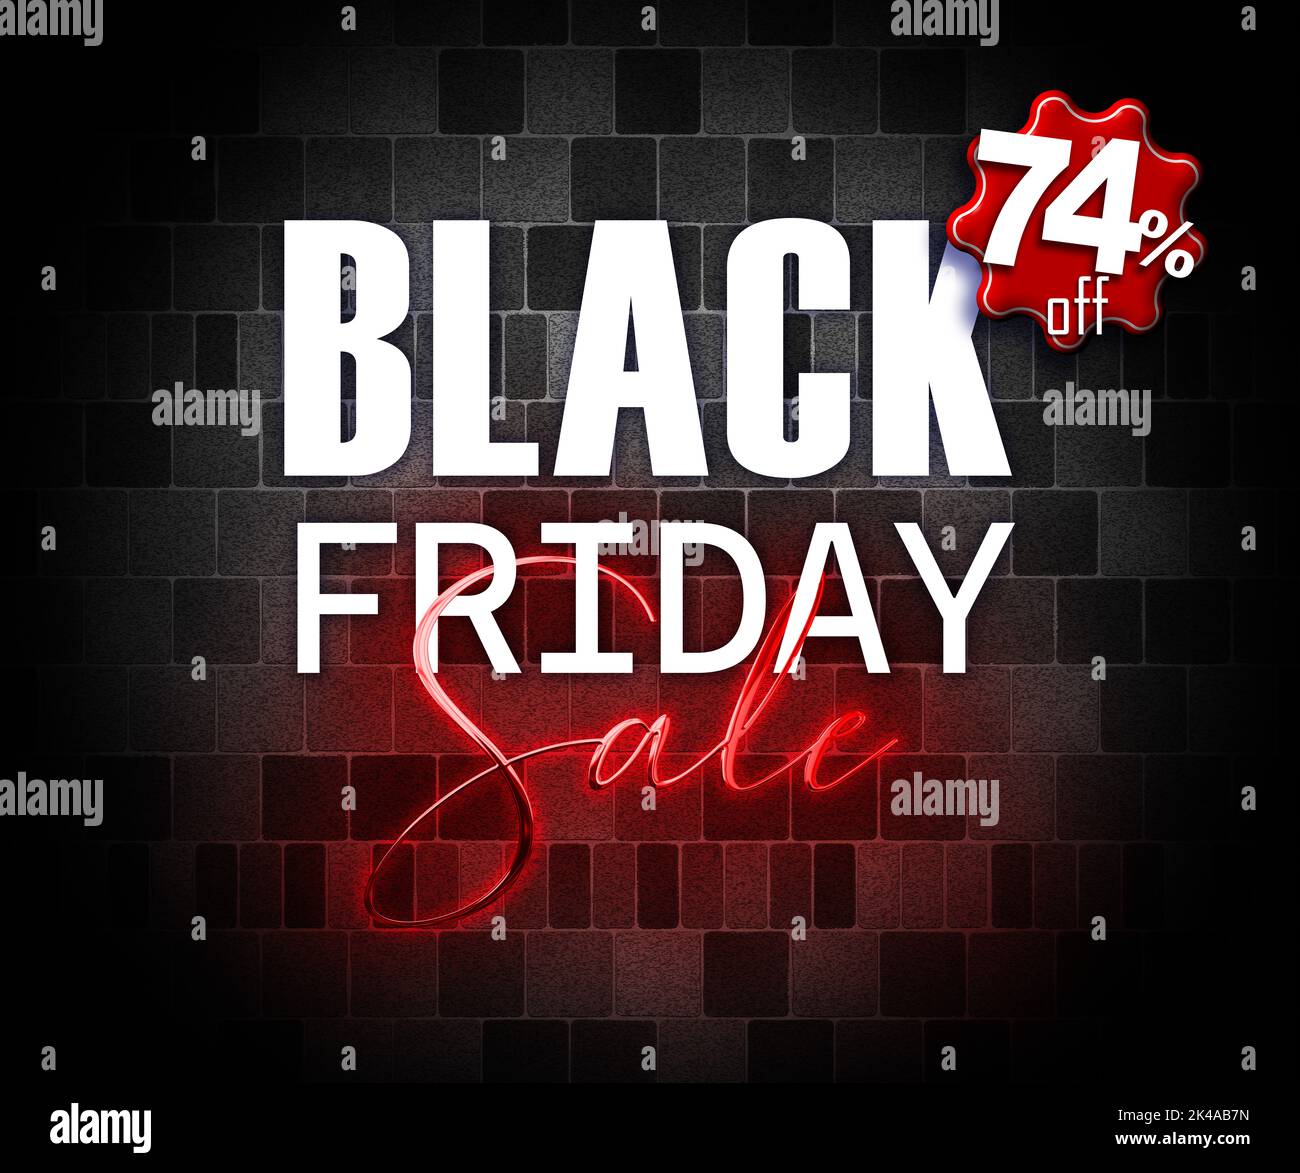 illustration with 3d elements black friday promotion banner 74 percent off sales increase Stock Photo